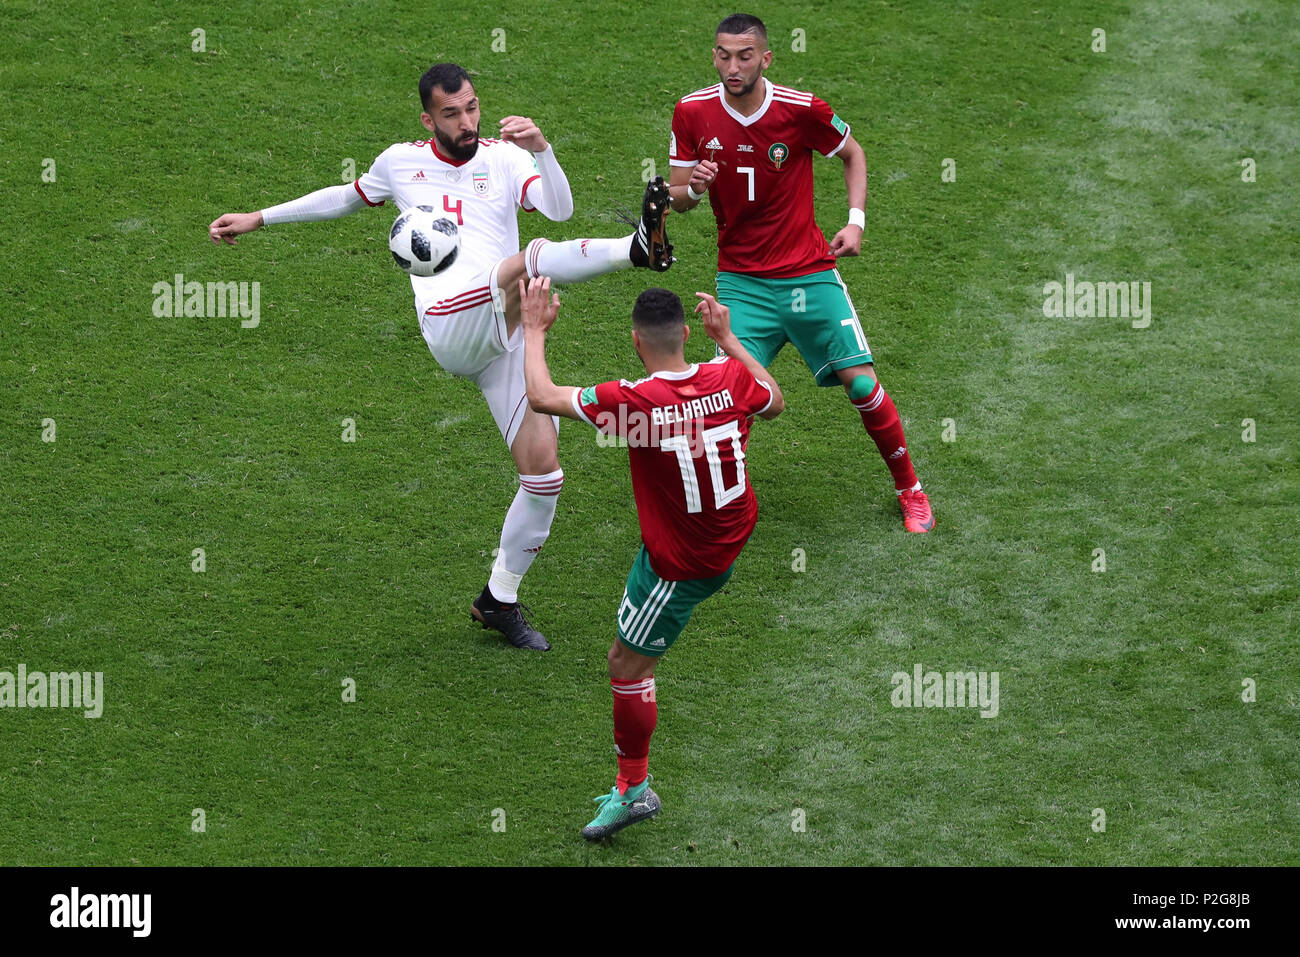 Saint Petersburg, Russia. 15th June, 2018. Iran's Rouzbeh Cheshmi (L) in action against Morocco's Hakim Ziyech (R) and Younes Belhanda during the FIFA World Cup 2018 Group B soccer match between Iran and Morocco at the Saint Petersburg Stadium, in Saint Petersburg, Russia, 15 June 2018. Credit: Saeid Zareian/dpa/Alamy Live News Stock Photo